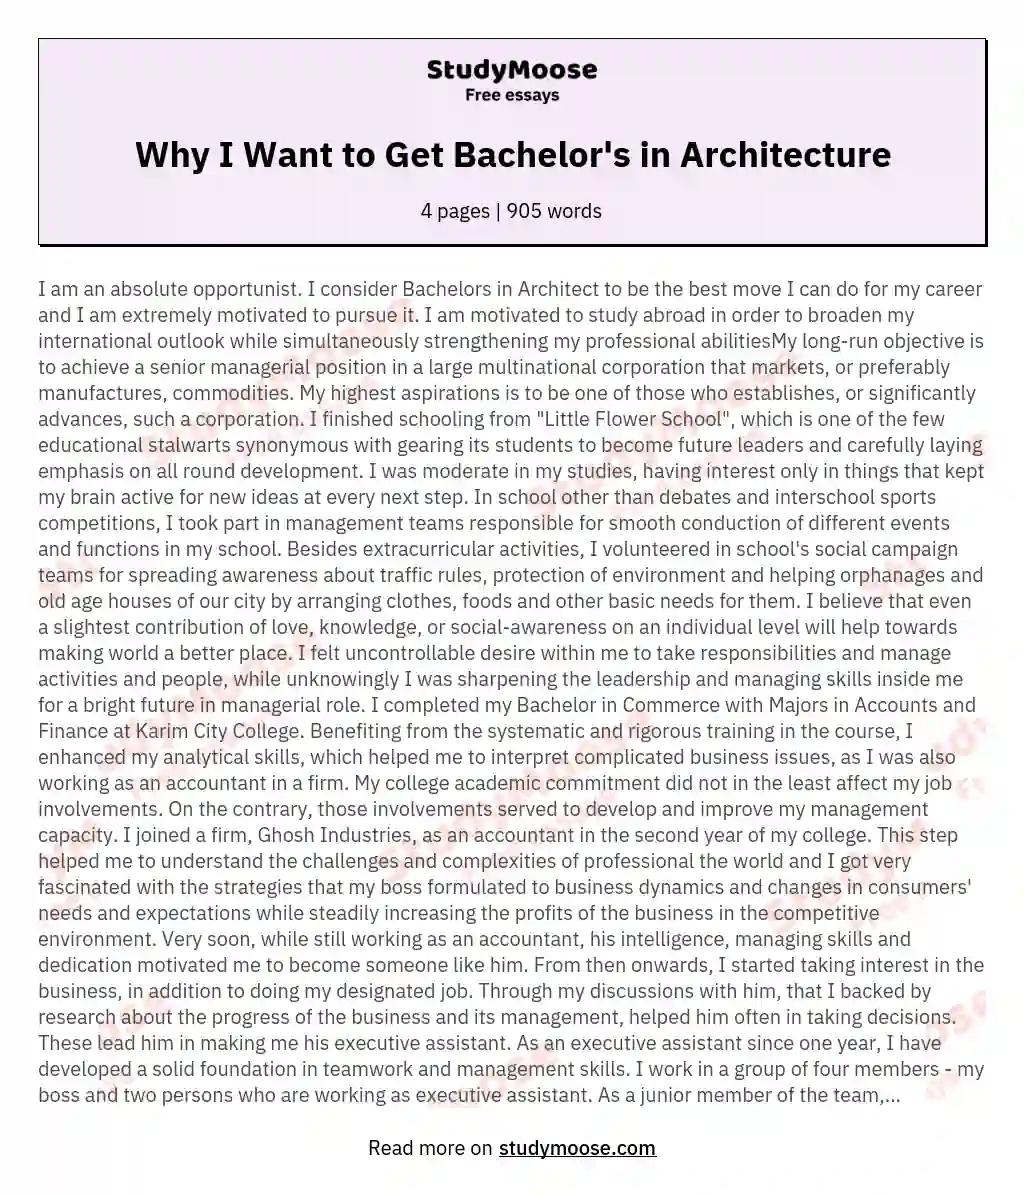 Why I Want to Get Bachelor's in Architecture essay